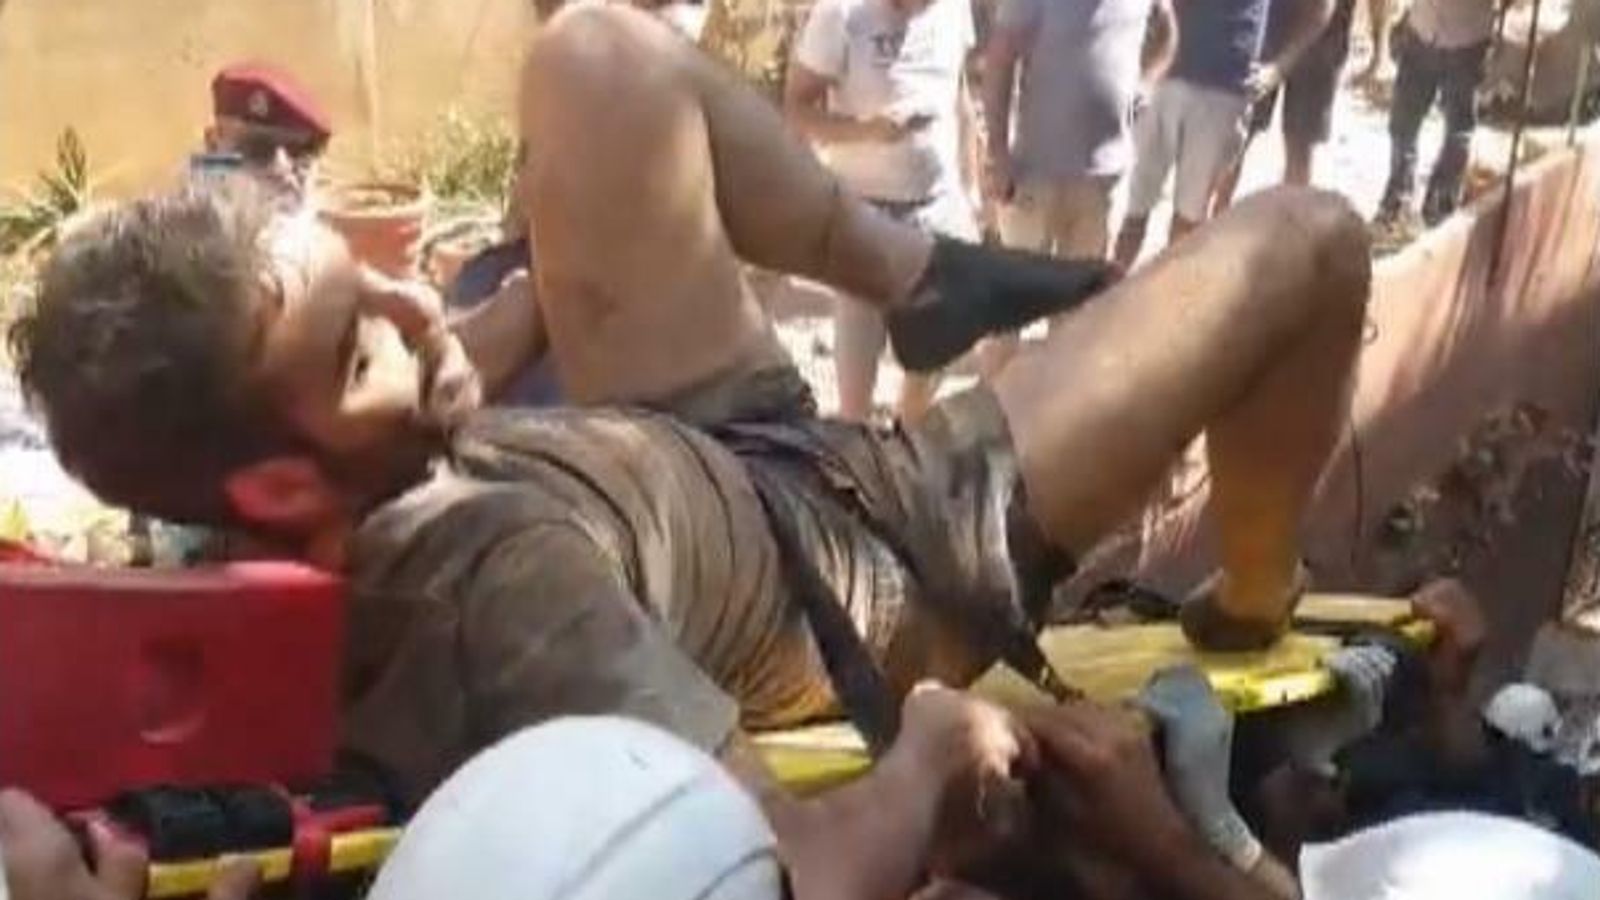 Man rescued from rubble in Beirut